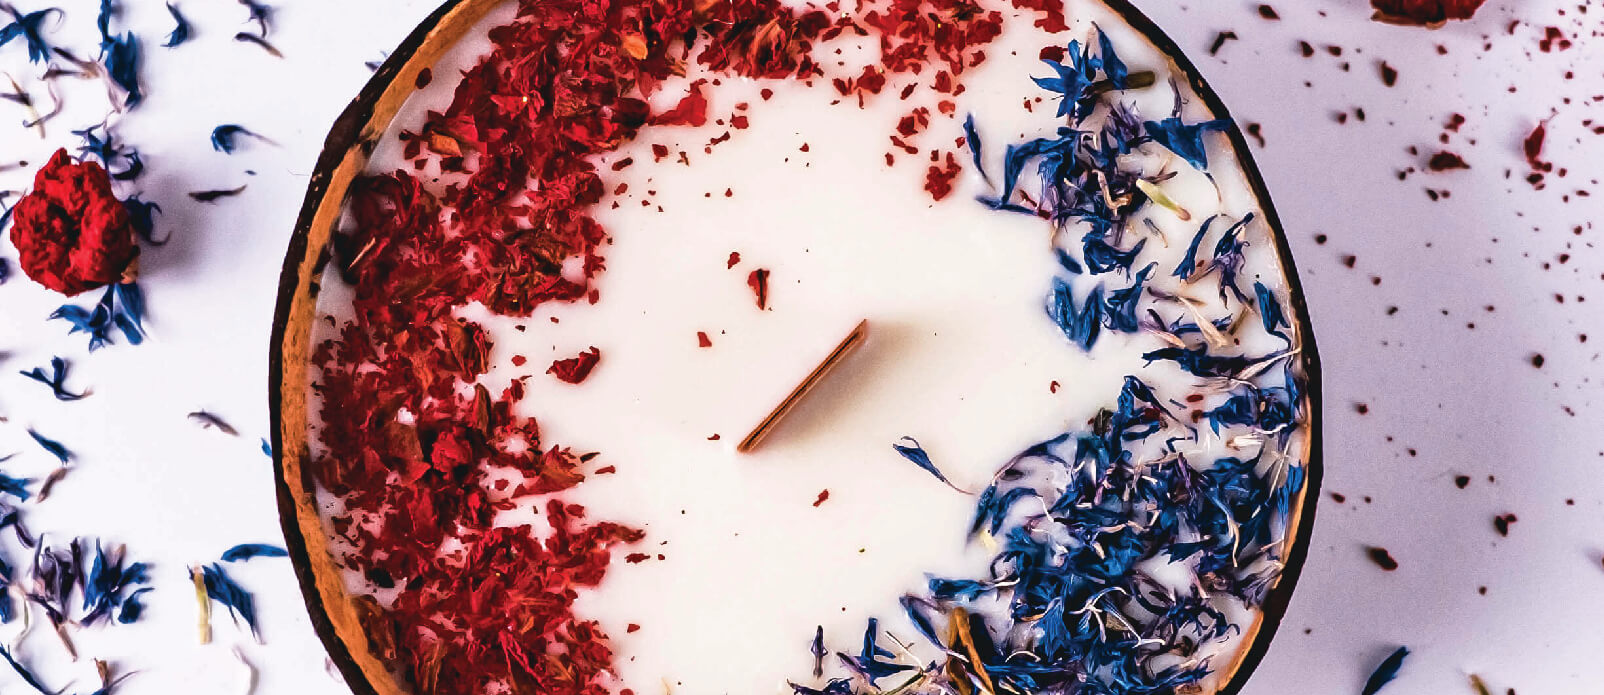 Dried flowers - how to make soy candles?